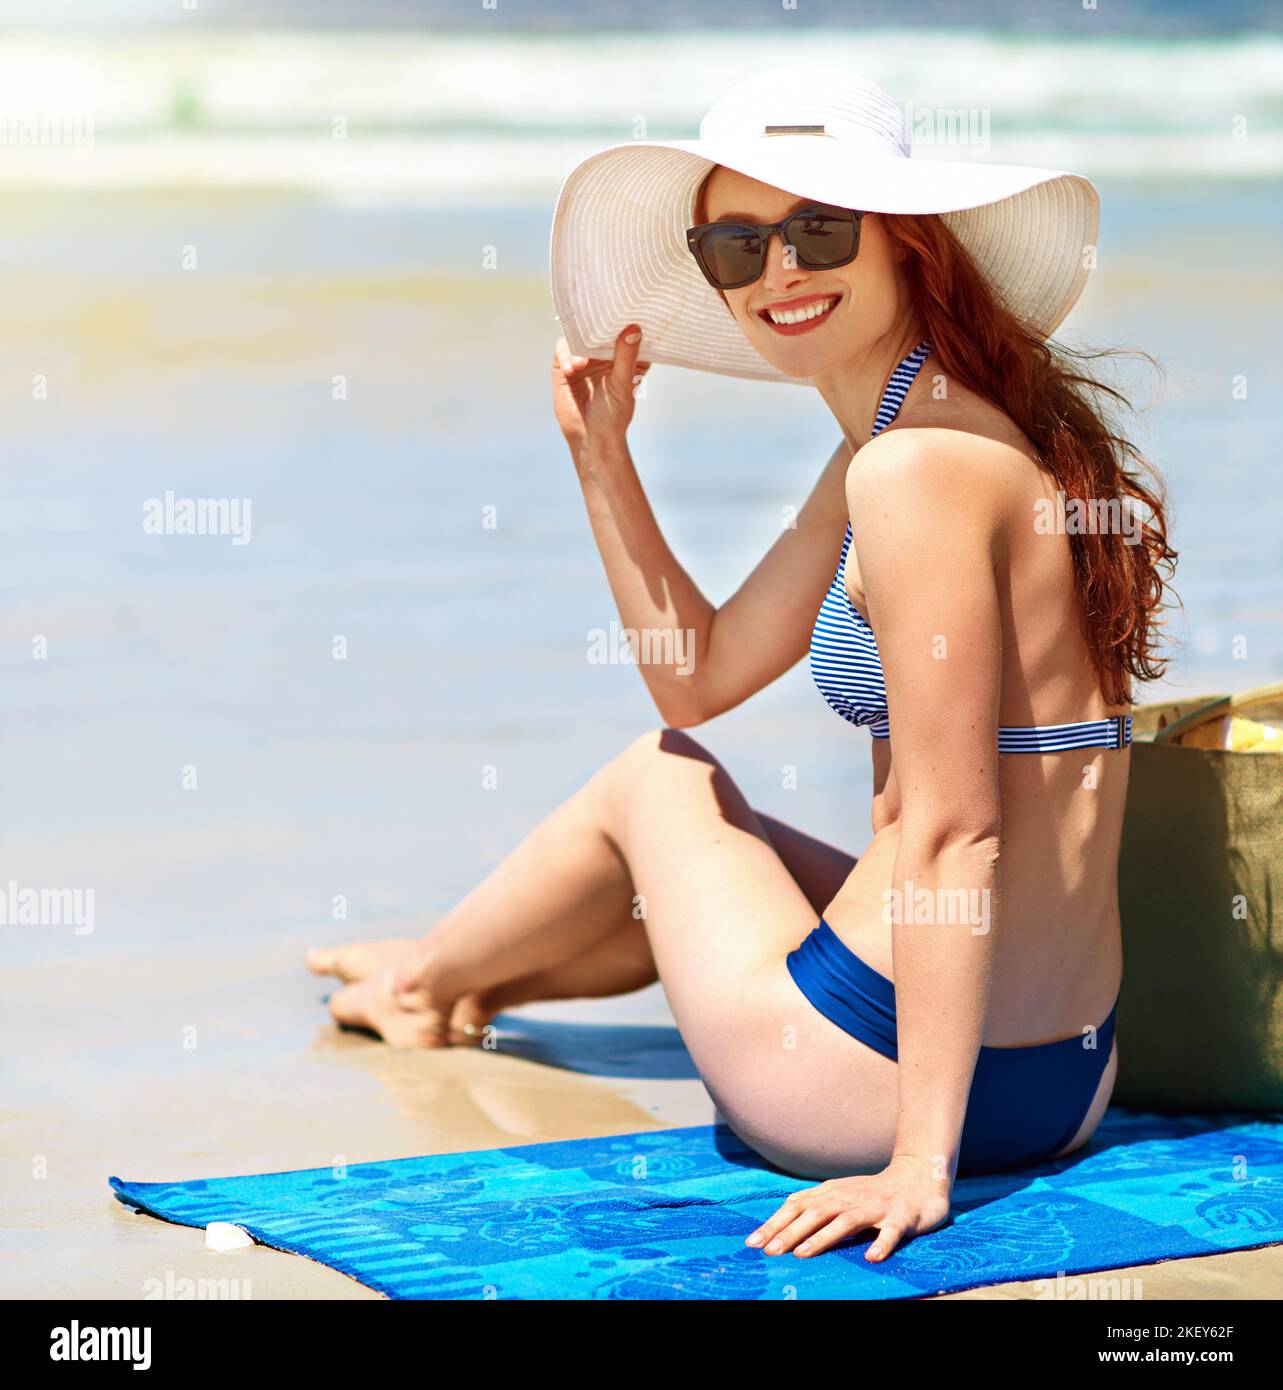 https://c8.alamy.com/comp/2KEY62F/have-a-seat-portrait-of-a-beautiful-young-woman-sitting-on-a-towel-at-the-beach-2KEY62F.jpg